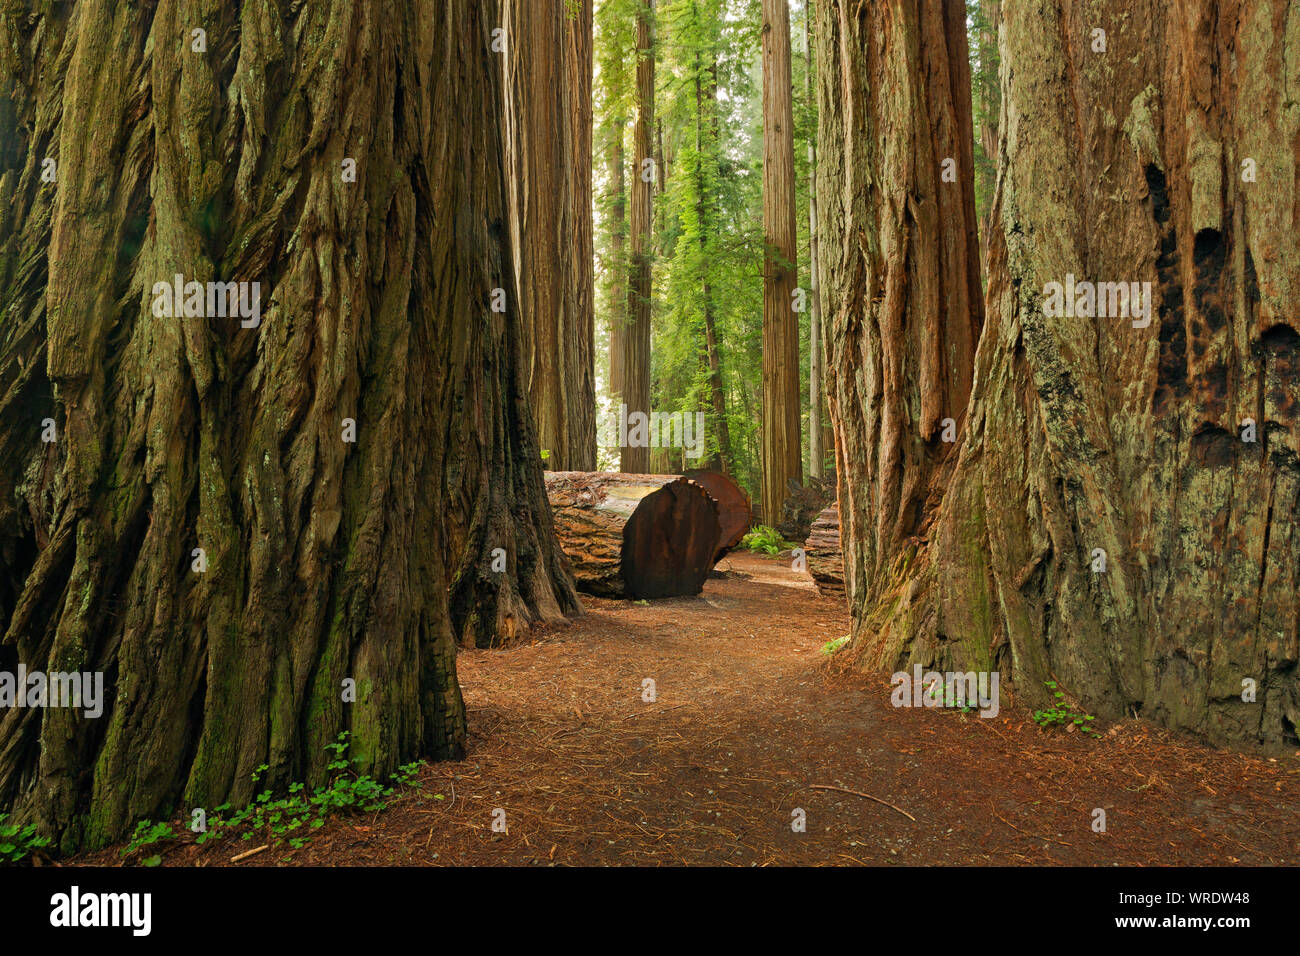 CA03512-00...CALIFORNIA - Trail through the giant redwood trees at Stout Grove in Jedediah Smith Redwoods State Park; part of the Redwoods National an Stock Photo